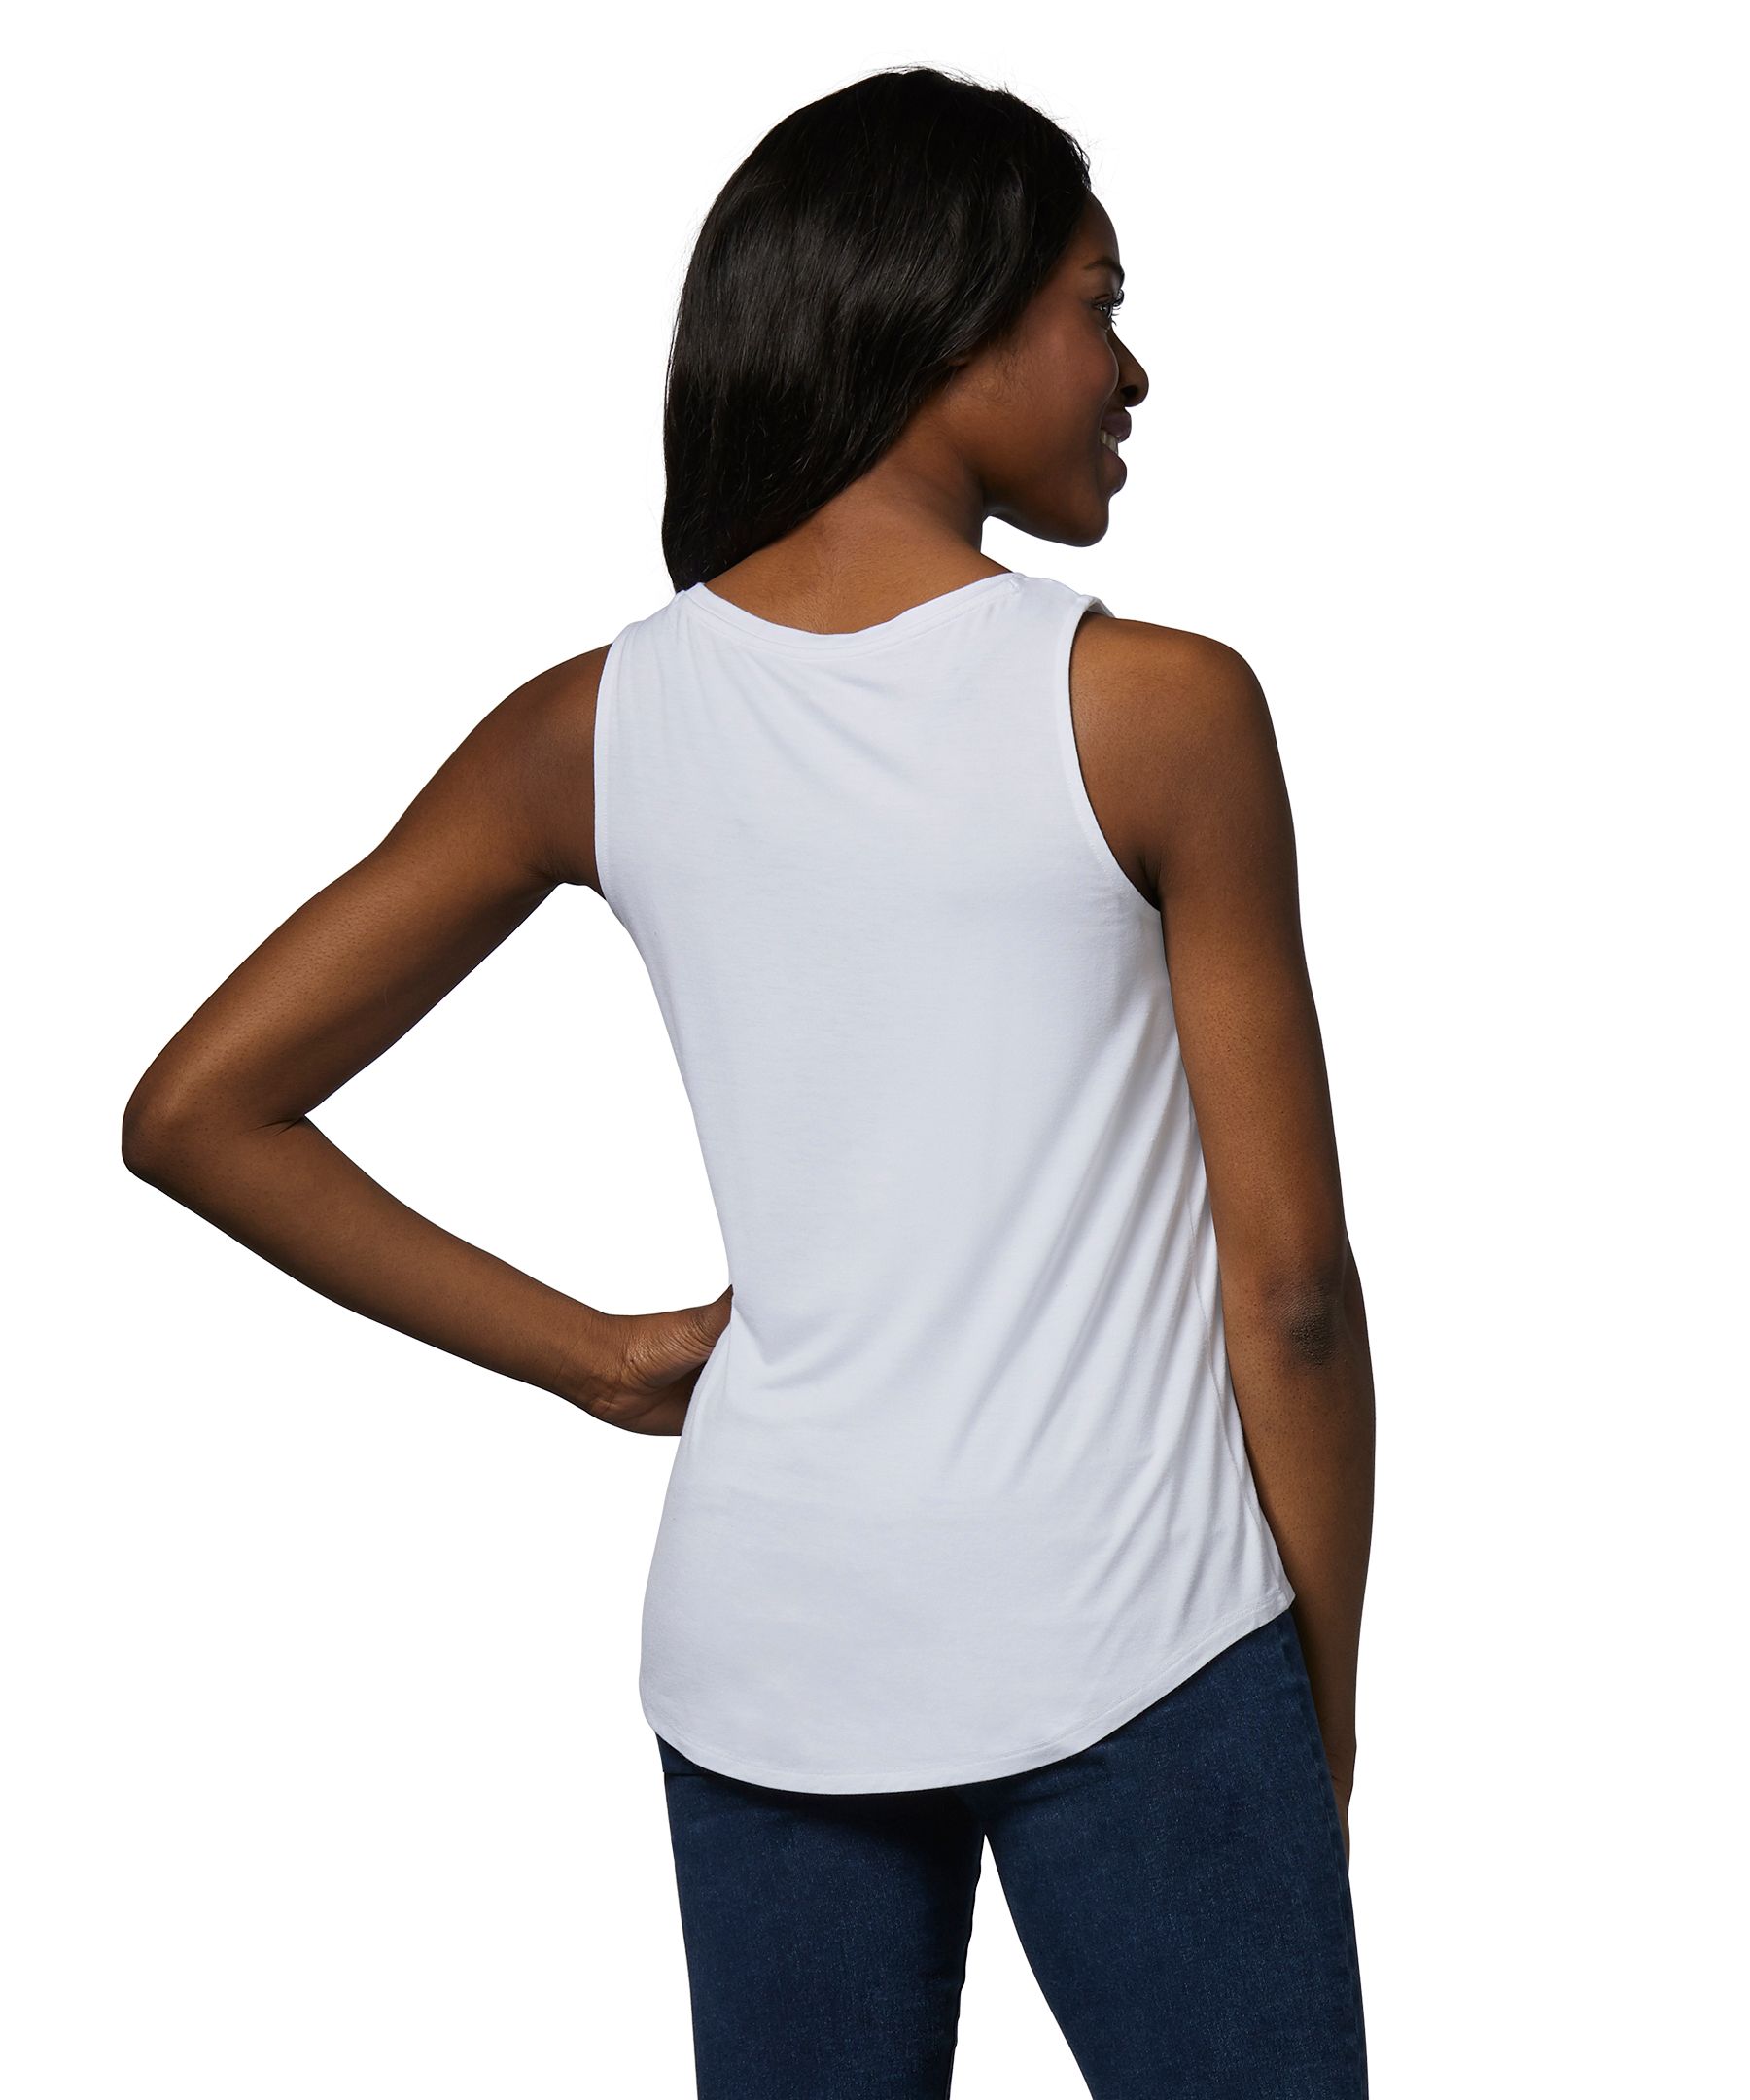 Denver Hayes Women's Relaxed Scoop Neck Tank Top